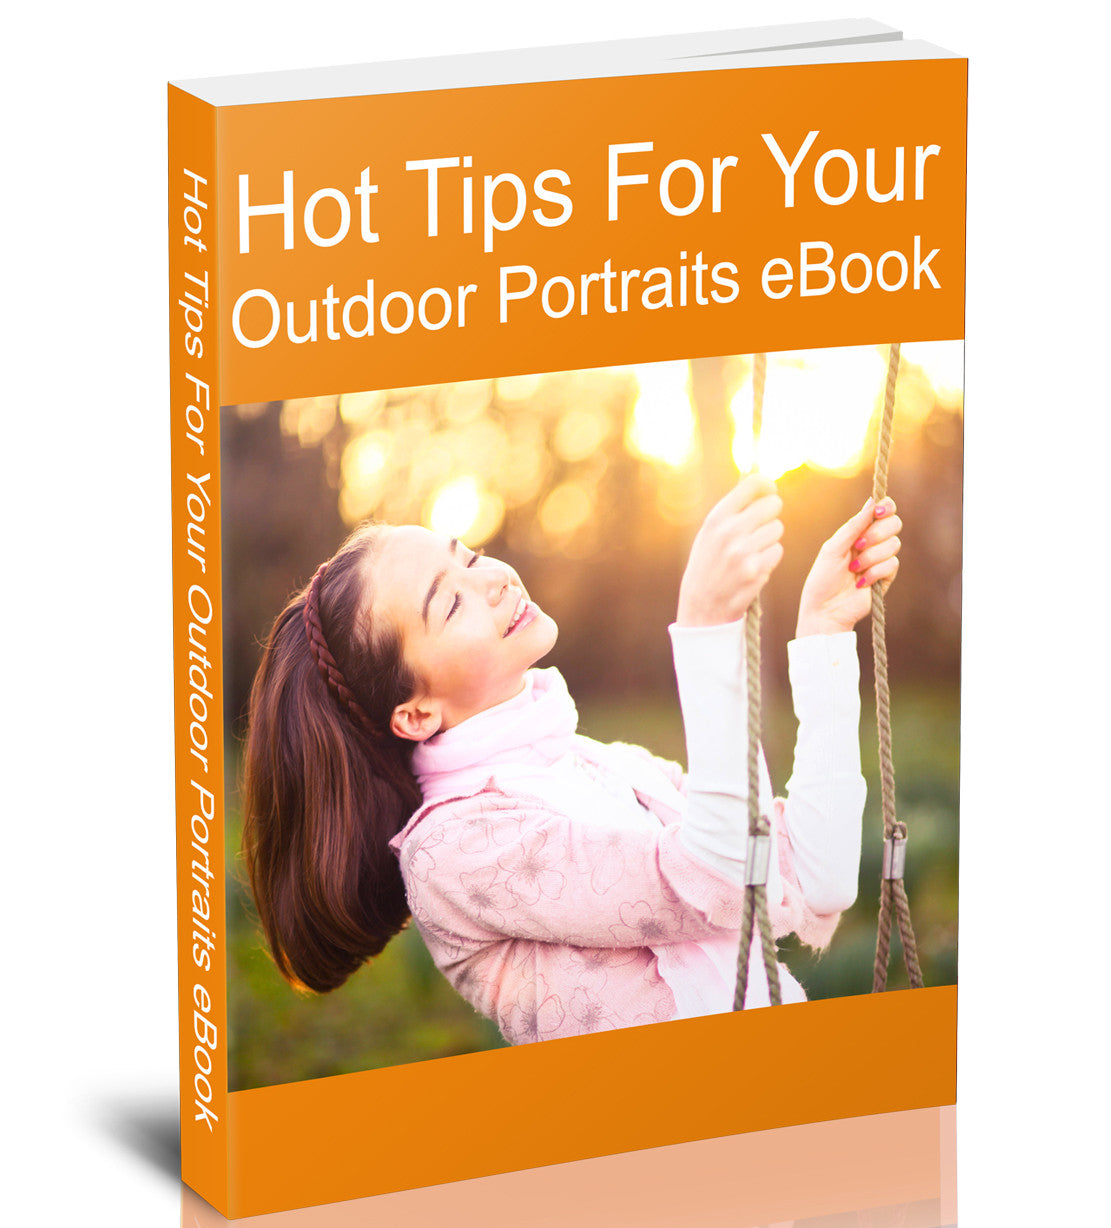 Hot Tips For Outdoor Portraits eBook